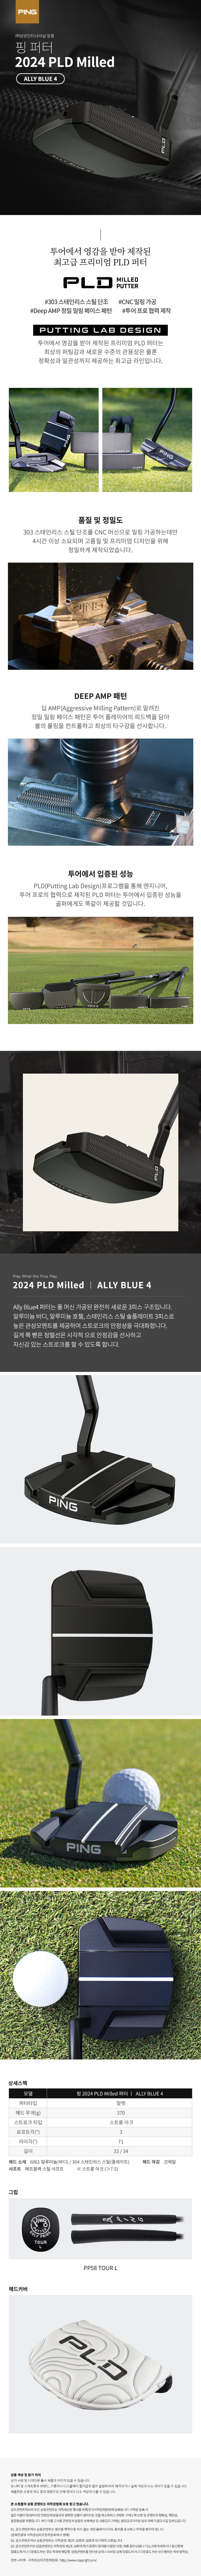 ping_milled_ally_blue_4_putter_24.jpg